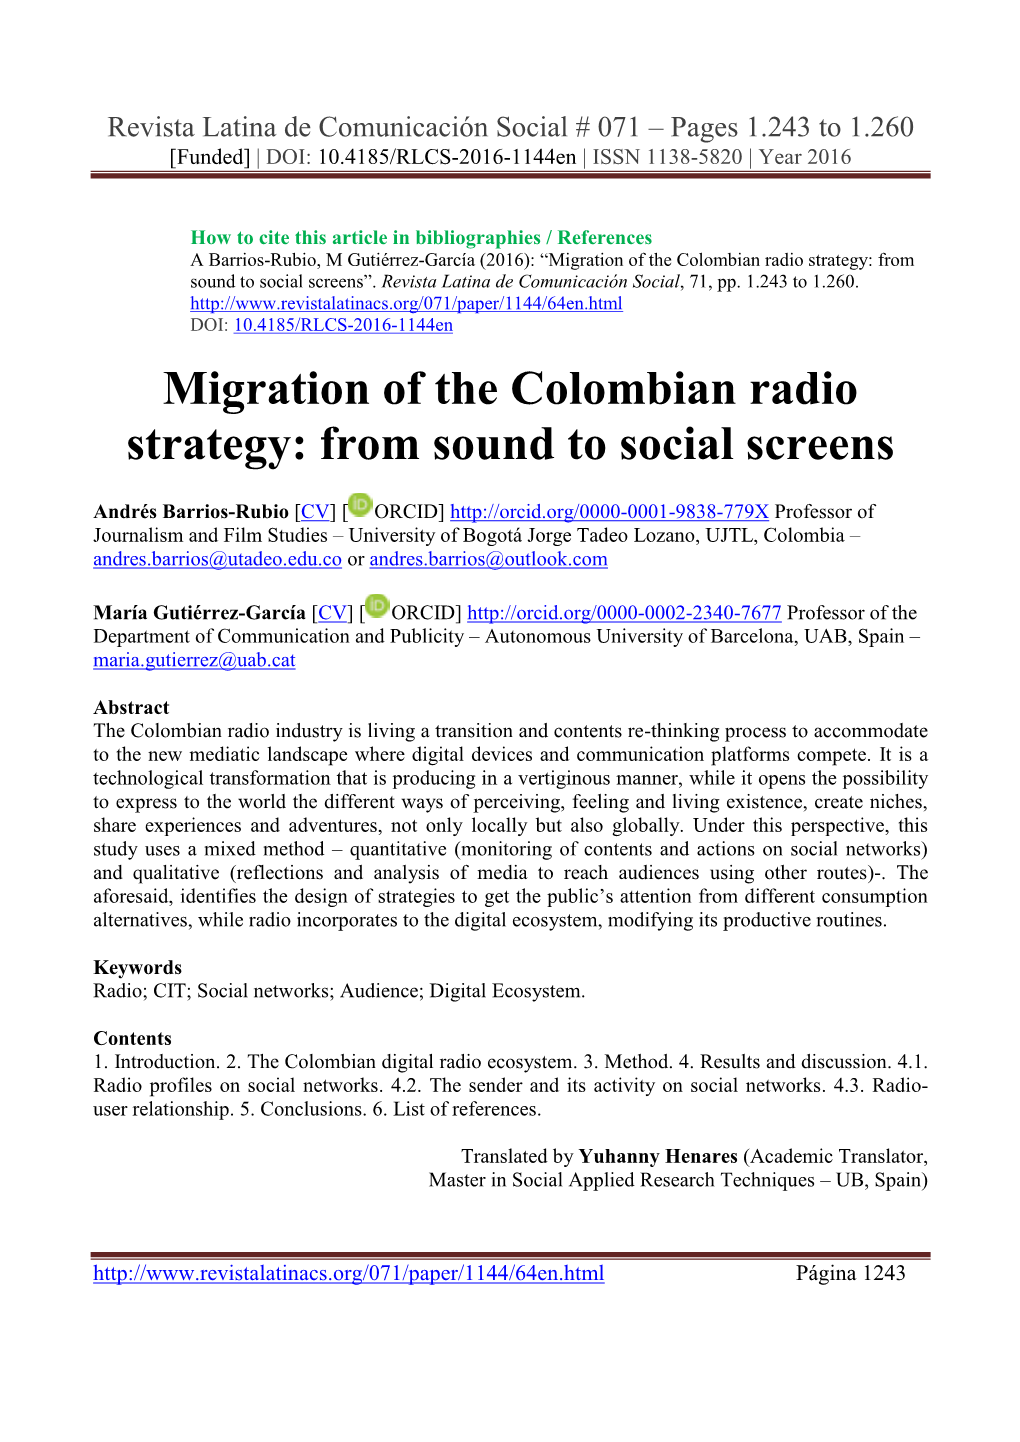 Migration of the Colombian Radio Strategy: from Sound to Social Screens‖